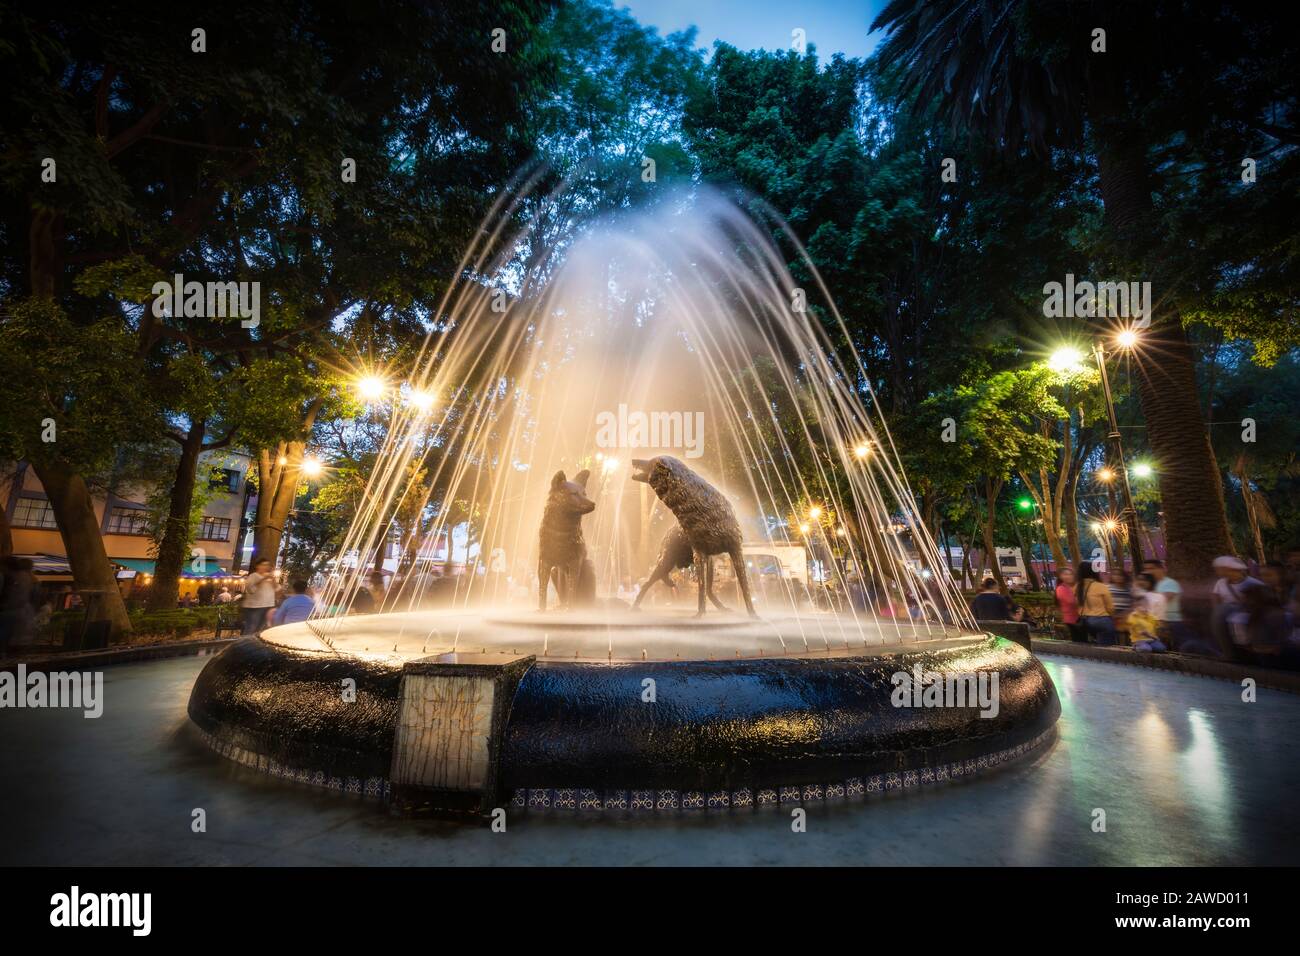 Twilight in the plaza of Coyoacan near the home of Frida Kahlo, Mexico City, Mexico. Stock Photo